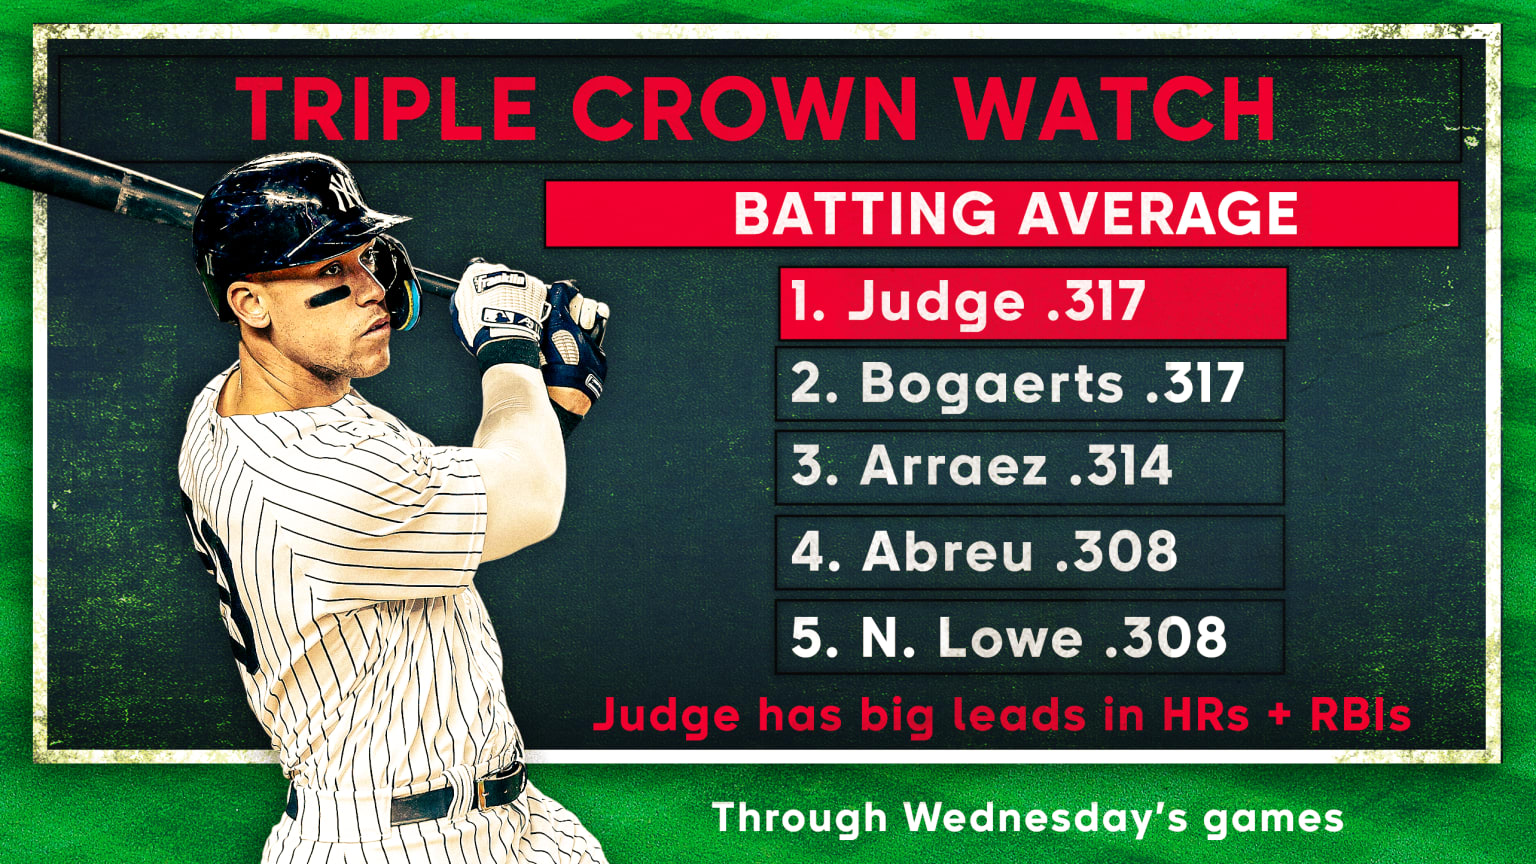 An image of Aaron Judge following through on his swing next to an illustration of a leaderboard showing the up-to-date top batting averages in the American League